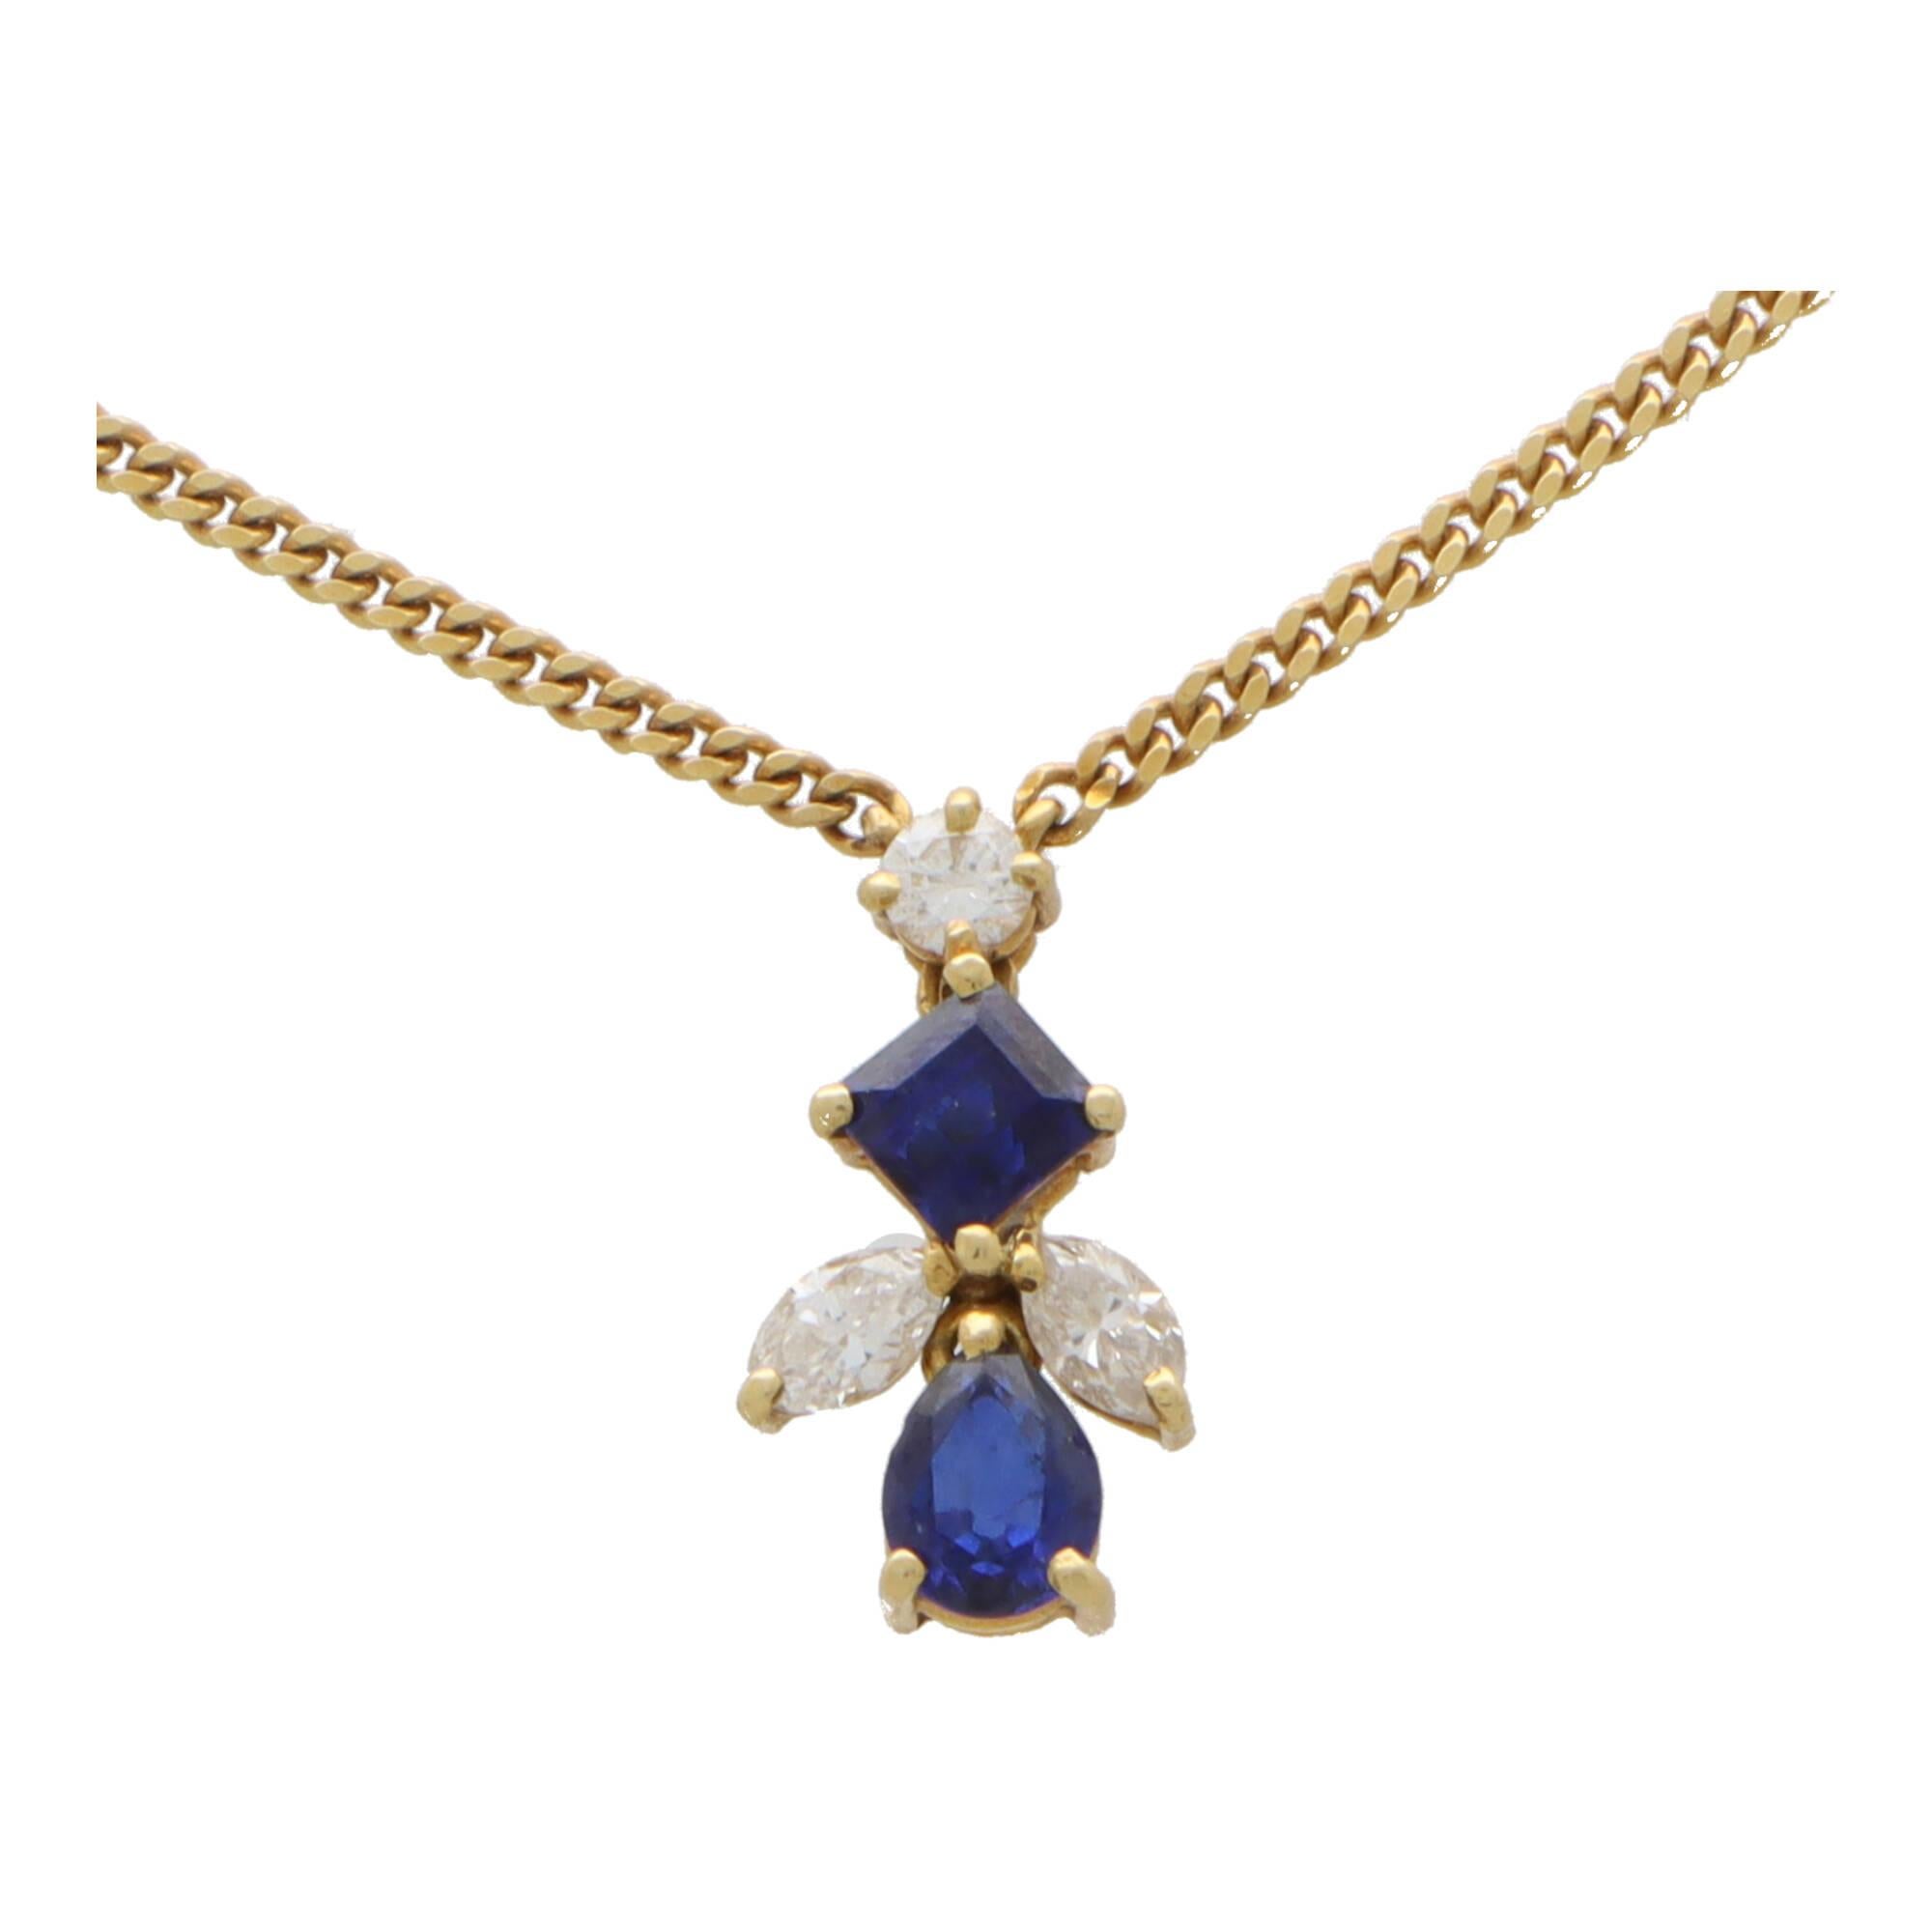 
A beautiful sapphire and diamond abstract pendant necklace set in 18k yellow gold.

The pendant is firstly composed of a round brilliant cut diamond which suspends a square cut sapphire and pear cut sapphire. The sapphires are securely claw set and